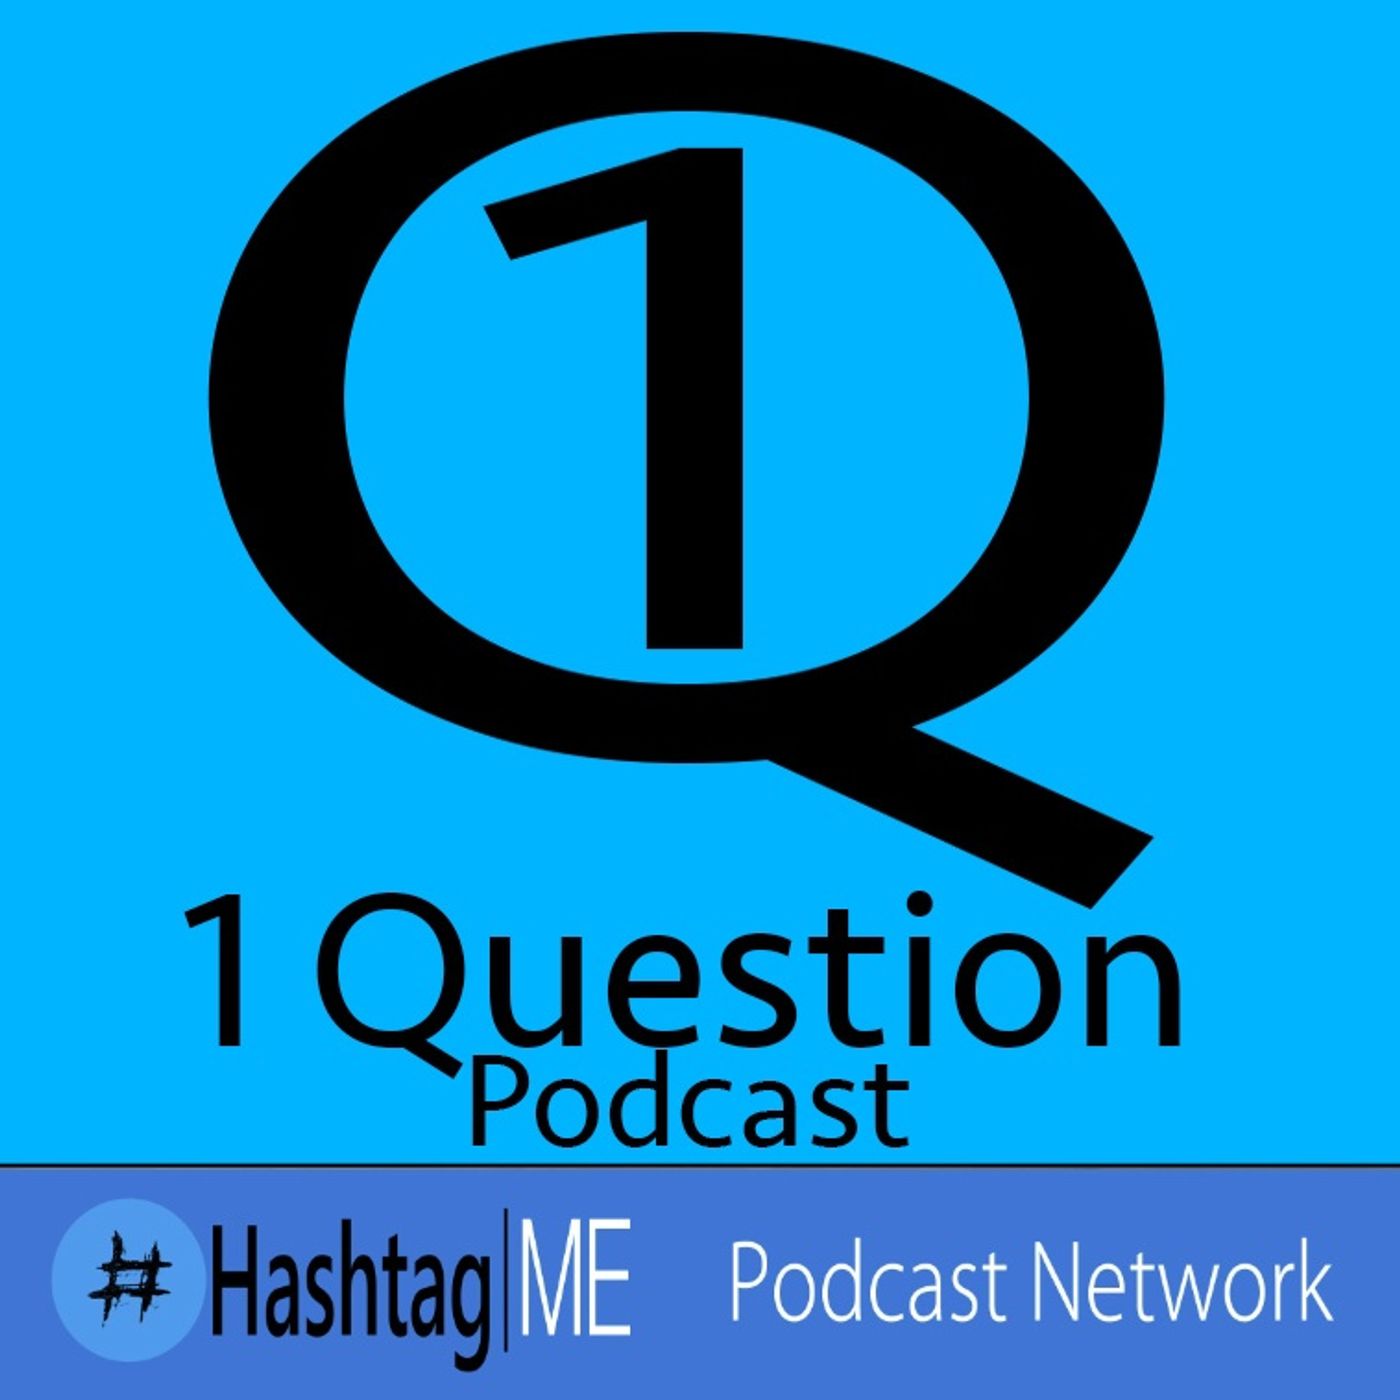 1 Question Podcast